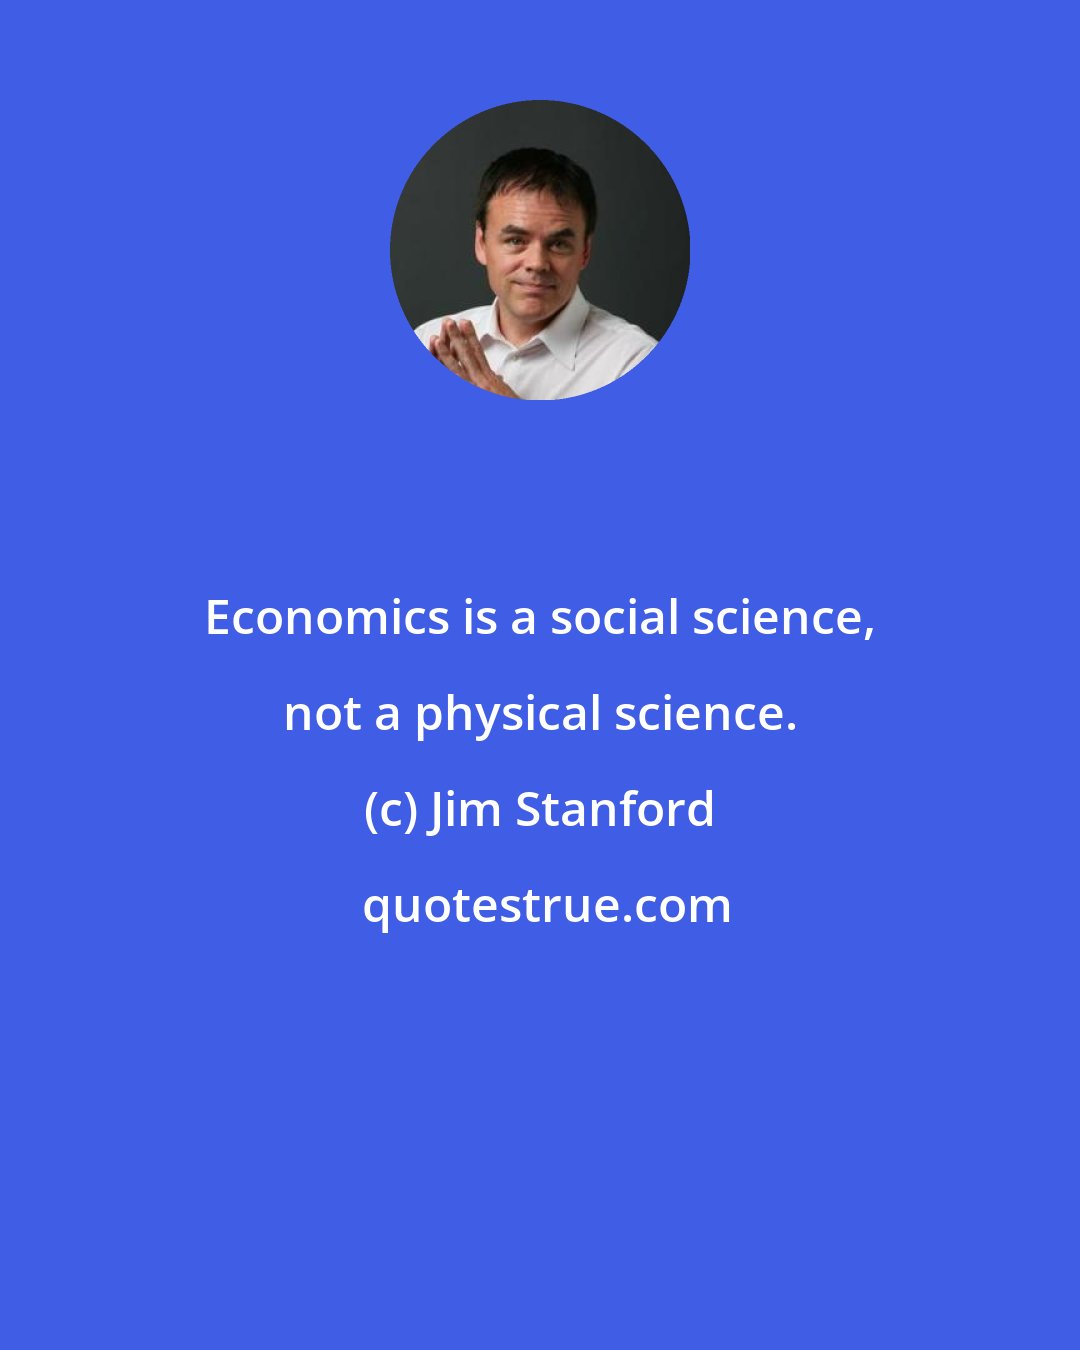 Jim Stanford: Economics is a social science, not a physical science.